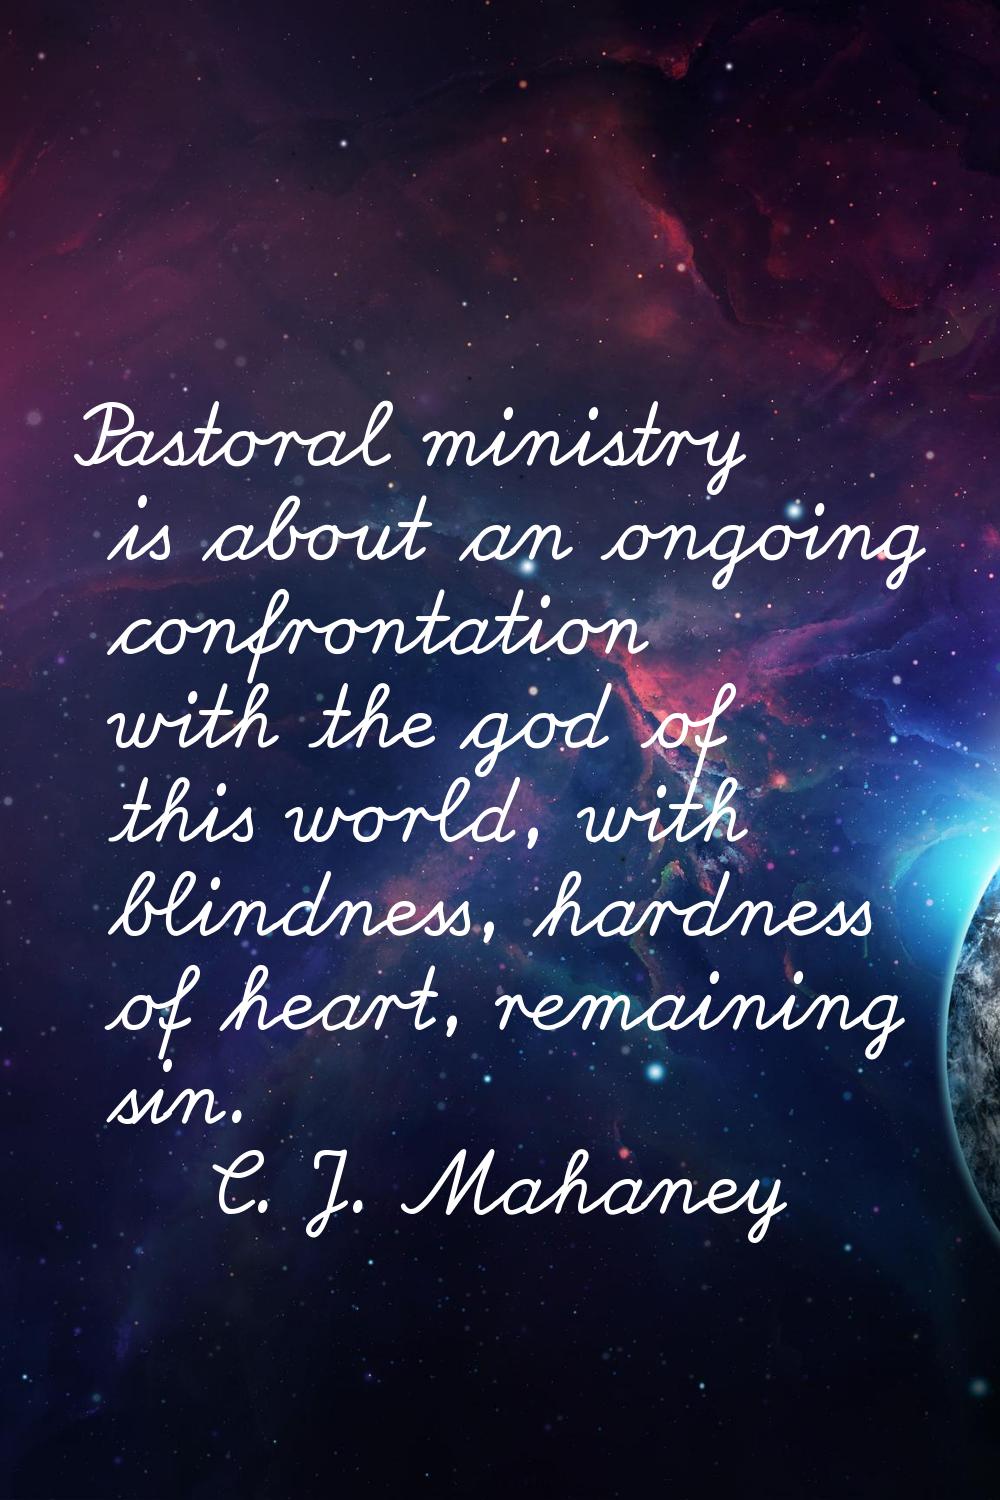 Pastoral ministry is about an ongoing confrontation with the god of this world, with blindness, har